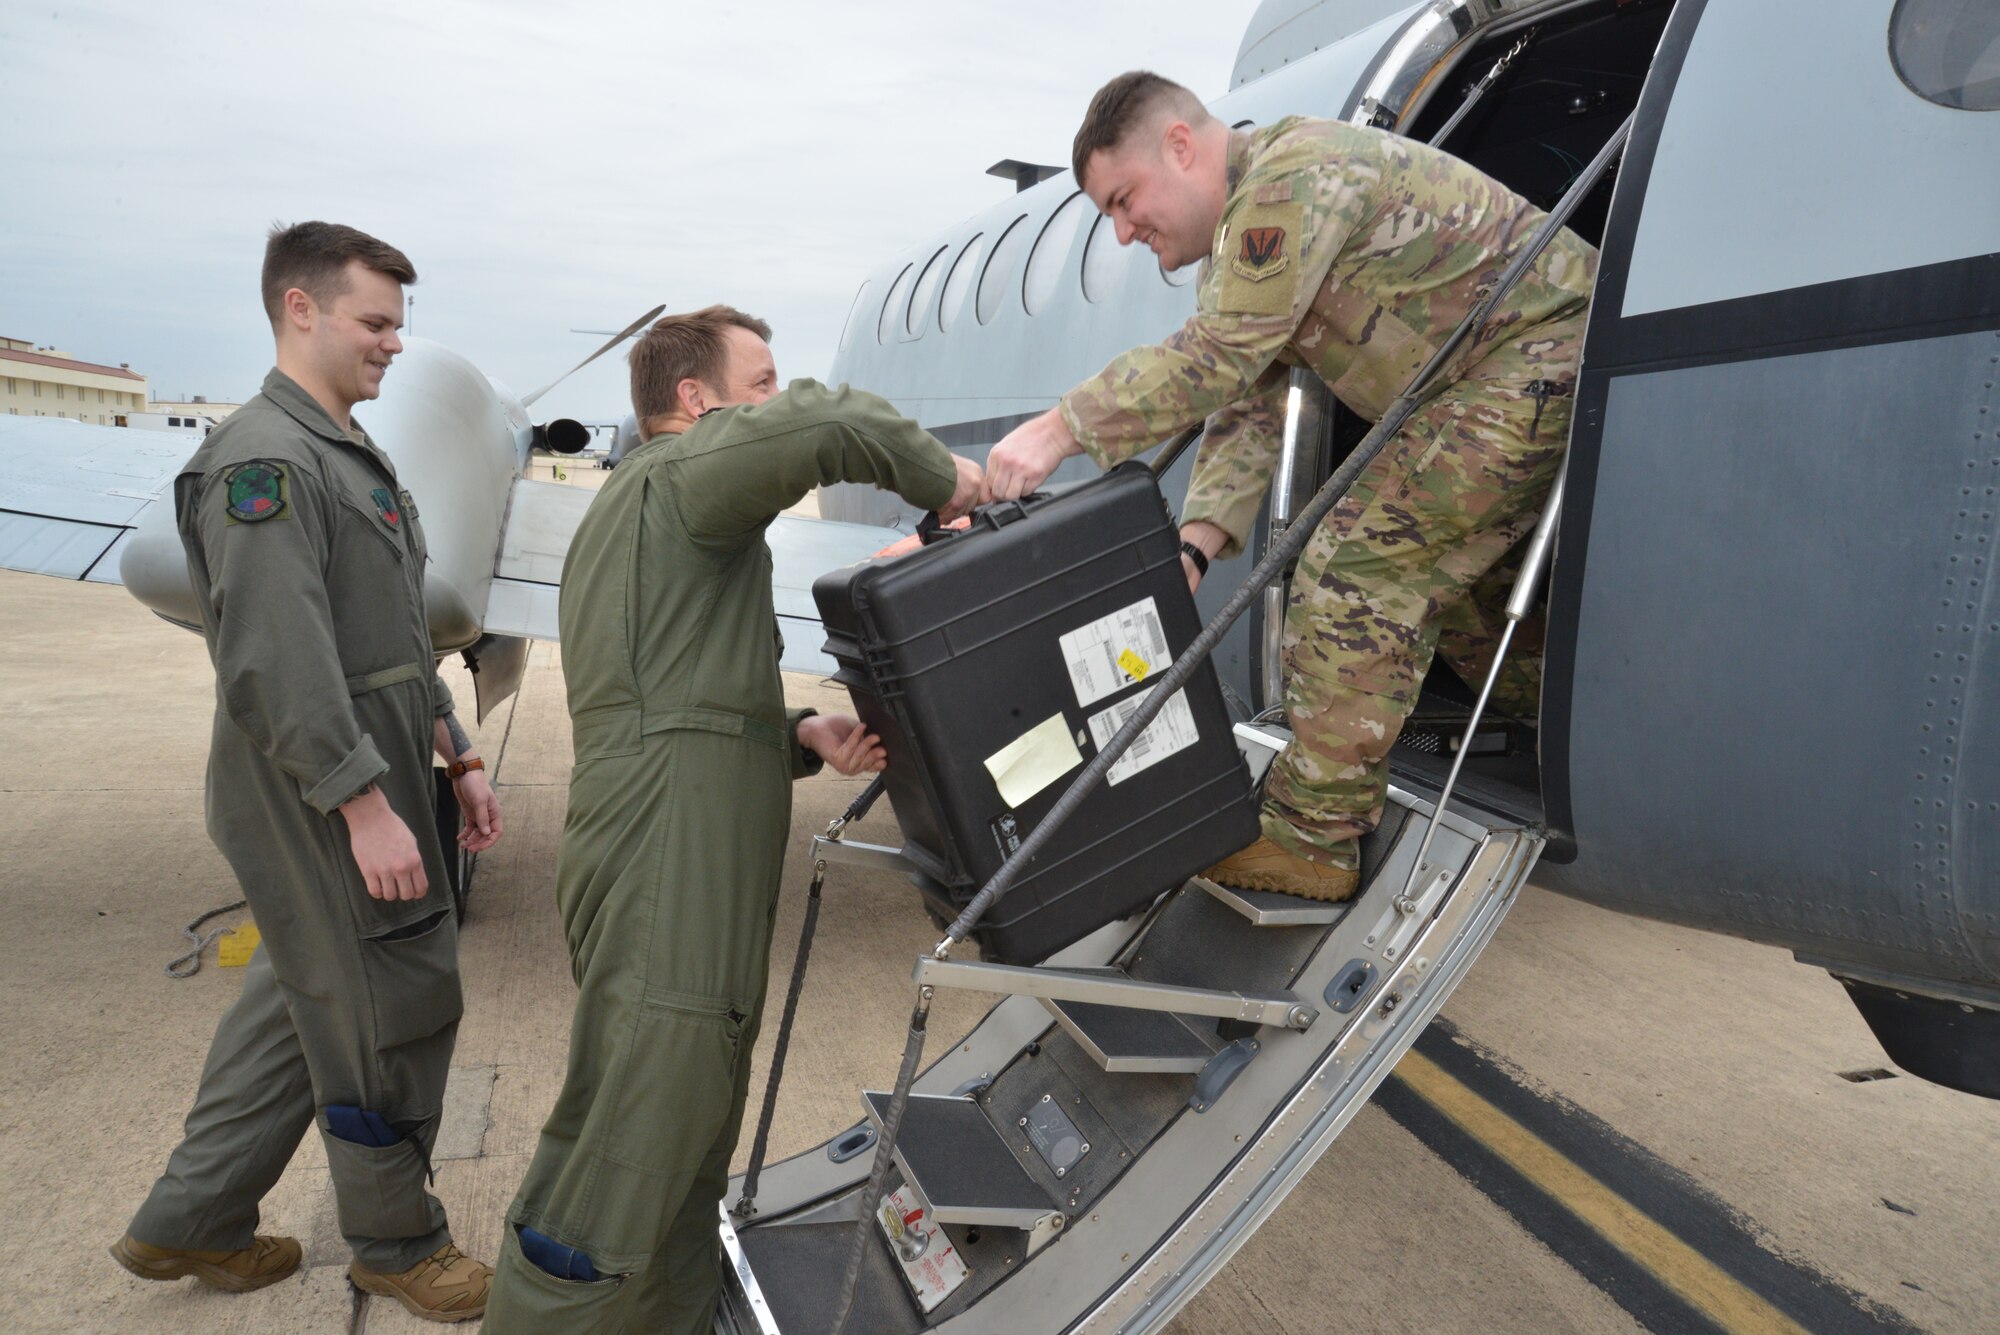 Lt. Col. Robby Trest, (middle) MC-12W Evaluator Pilot, from the 185th Special Operations Squadron, hands the Nebula, a specialized device used by tactical support operators, to Staff Sgt. Cole Weiss, tactical systems operator instructor, 306th Intelligence Squadron, as Staff Sgt. Gabriel Gibson, TSO instructor, 306th IS, stands ready to assist March 29, 2023, at Joint Base San Antonio-Lackland, Texas. The MC-12W Liberty aircrew from Will Rogers Air National Guard Base, Oklahoma City, were there to pick up the Nebula from an MC-12W that crashed April 27, 2013, near Kandahar Airfield, Afghanistan.